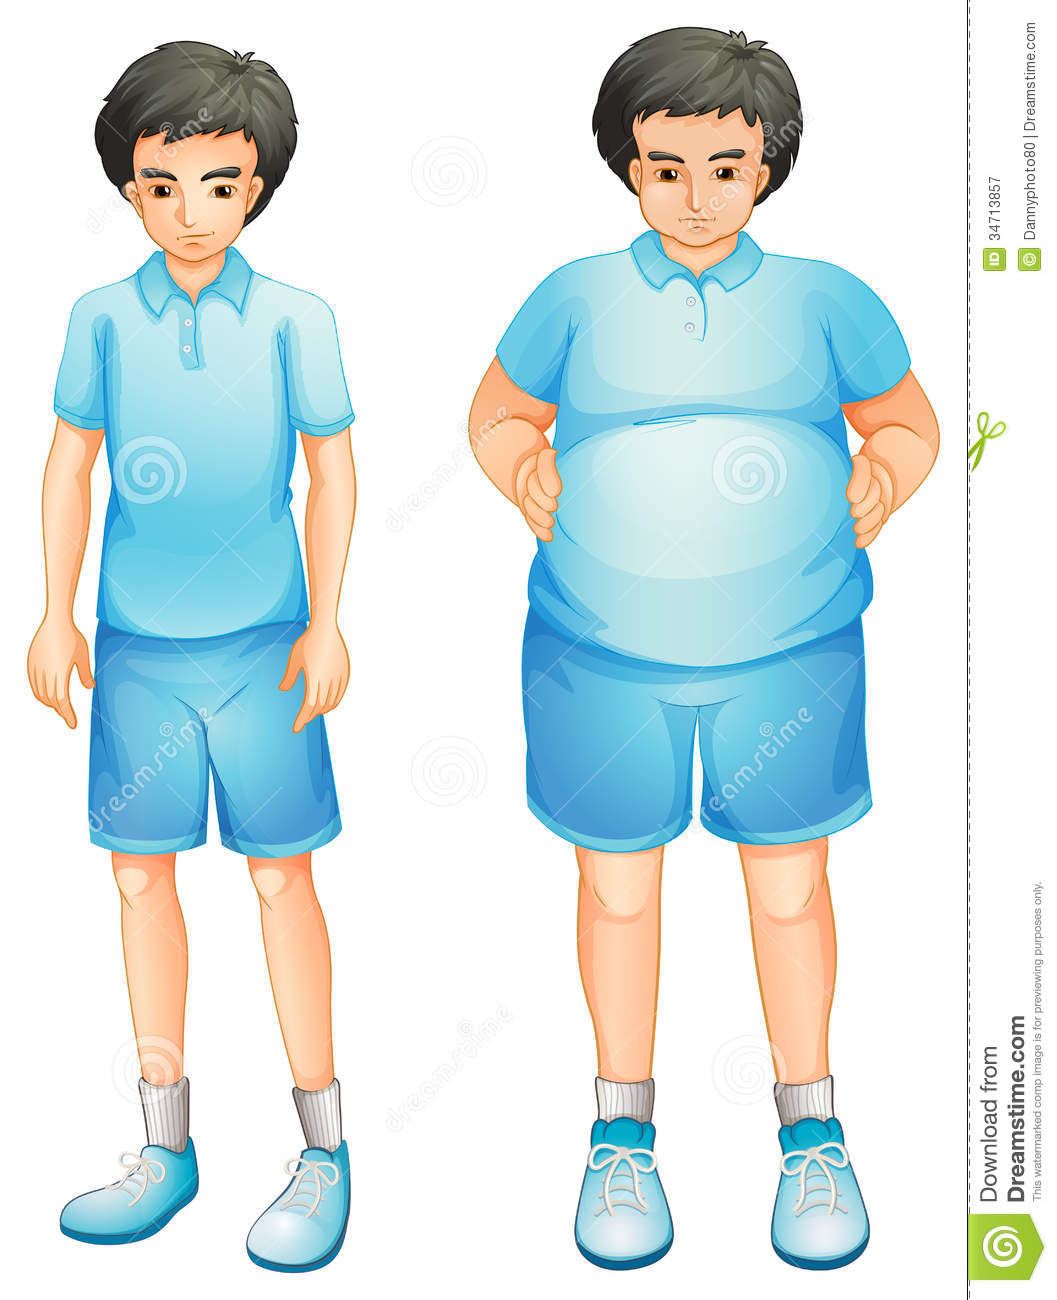 Ilustration Of A Thin And A Fat Boy In A Blue Gym Uniform On A White